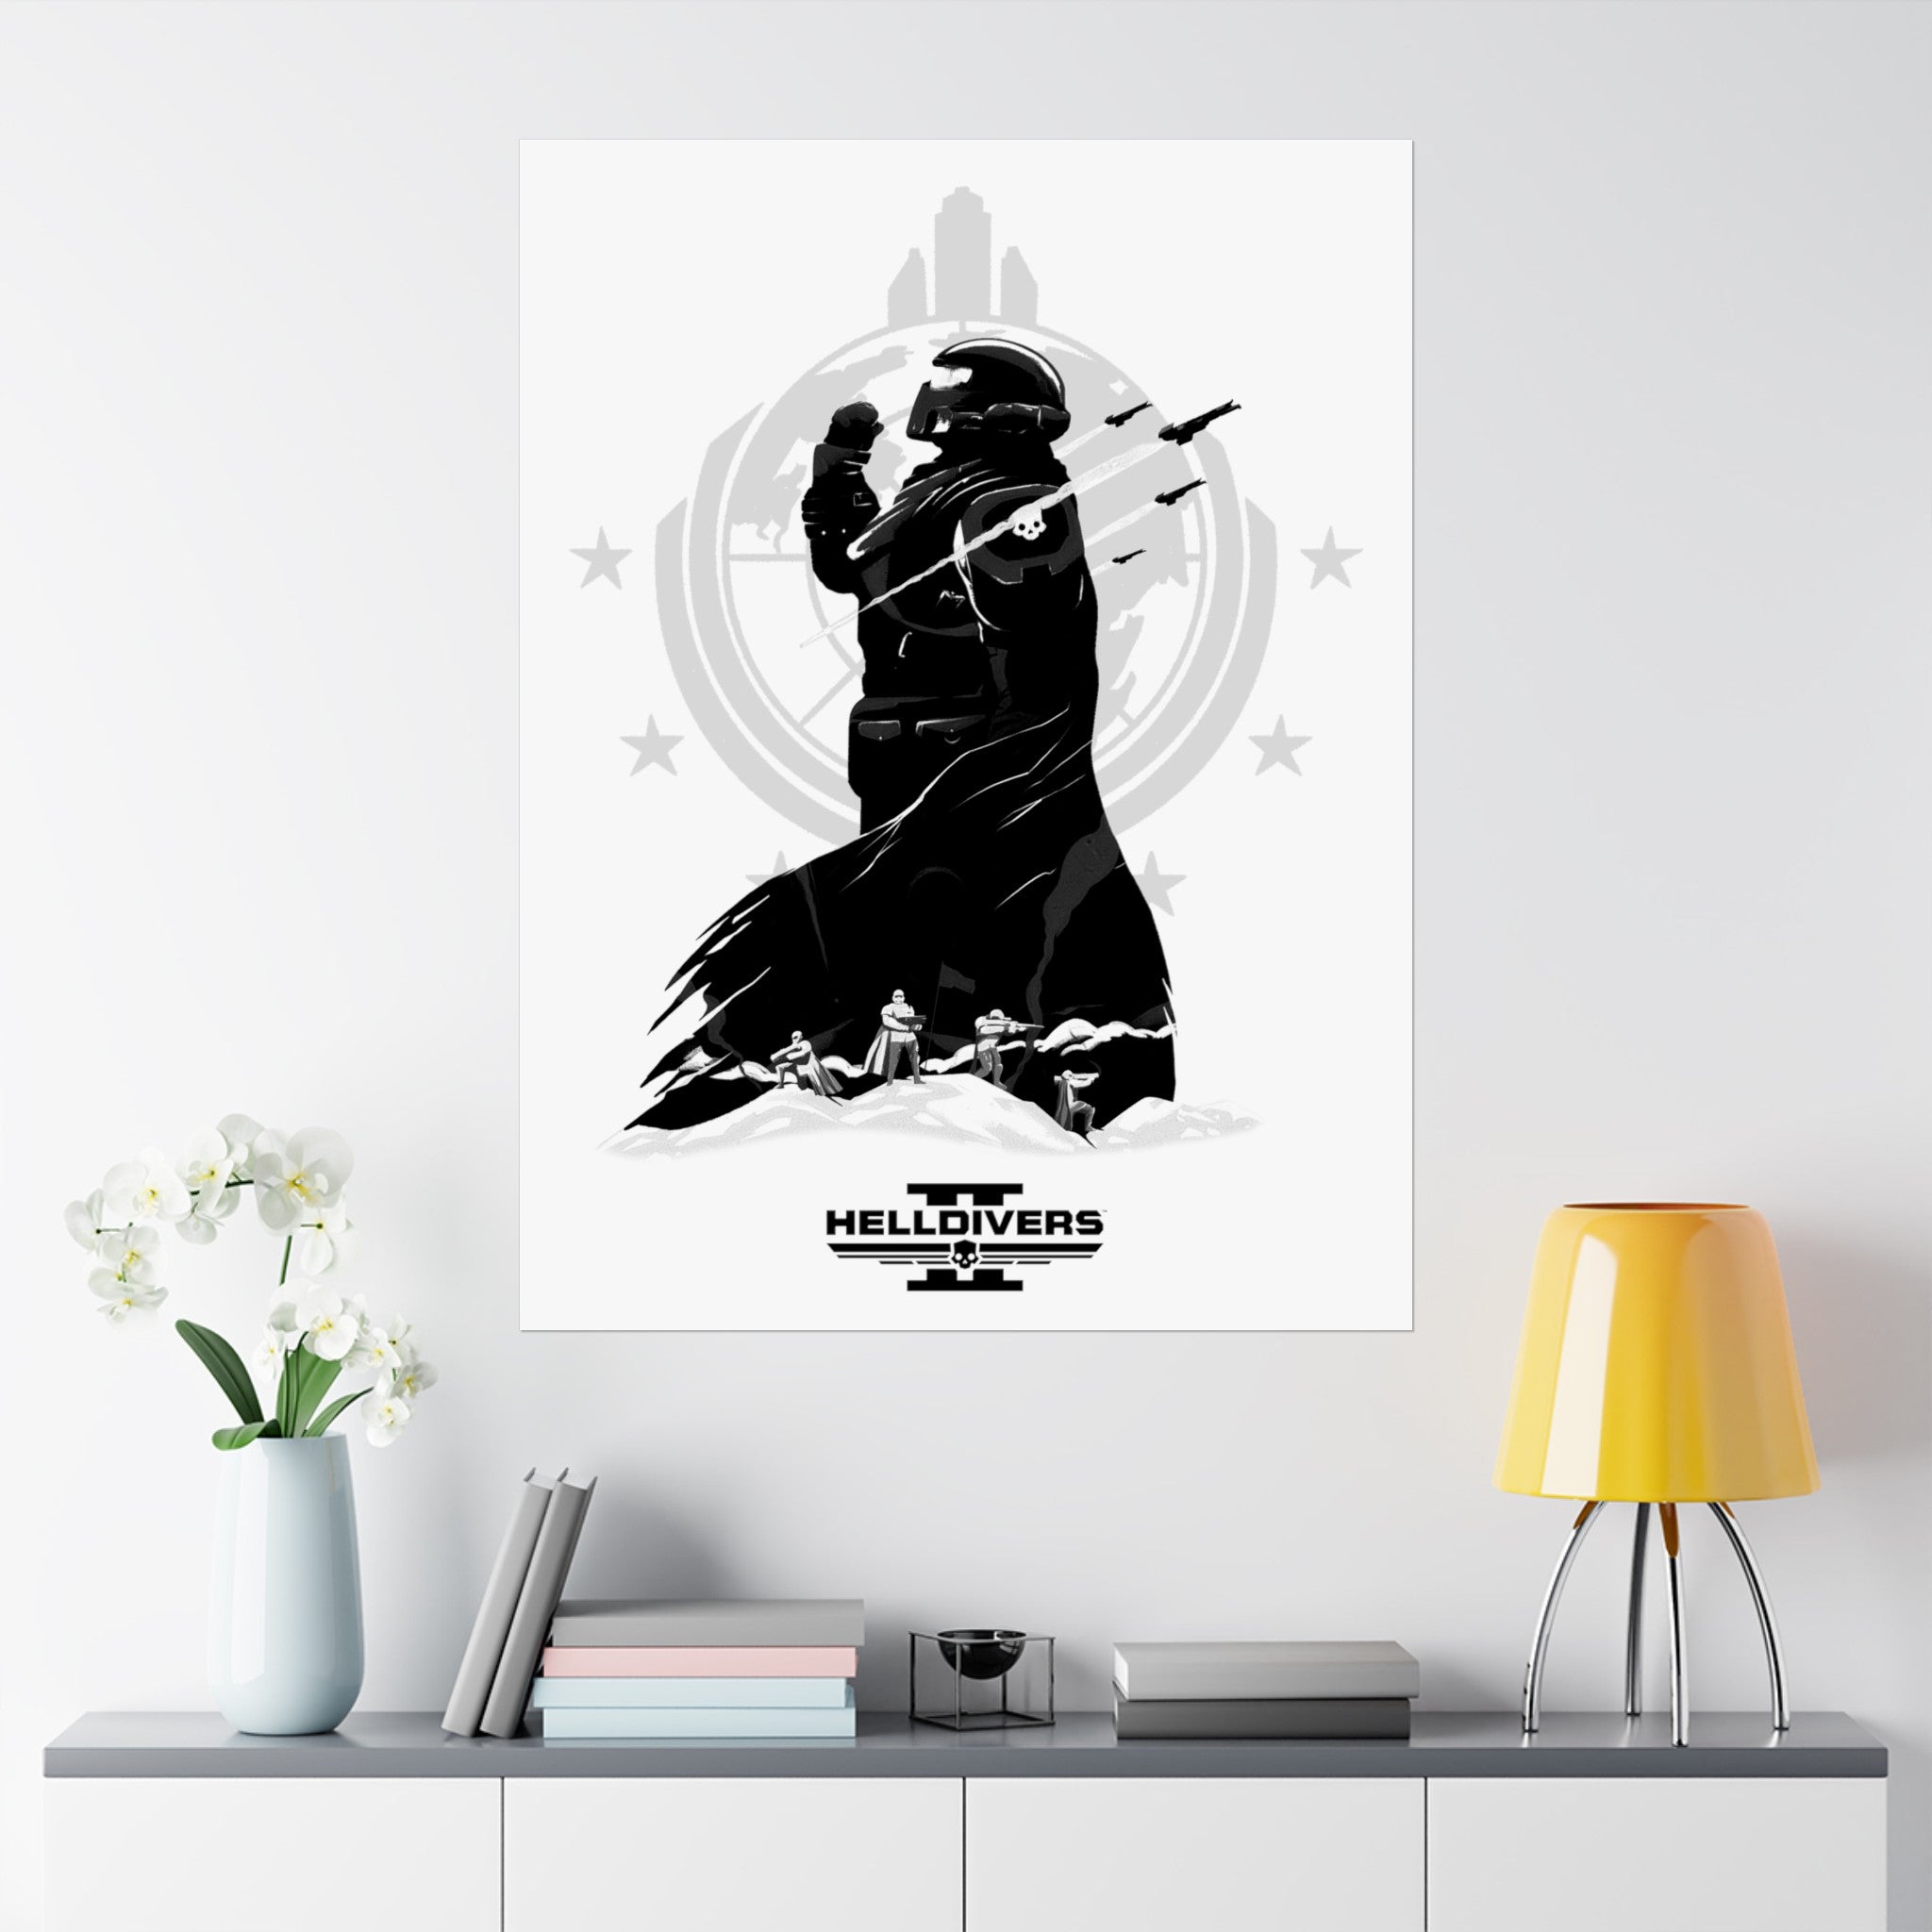 Helldivers 2 Matte Vertical Posters  Black & White Artistic Art Poster Design Minimalistic Gift Gamer Game Fanart Abstract Graphic Democracy Liberty Birthday Christmas